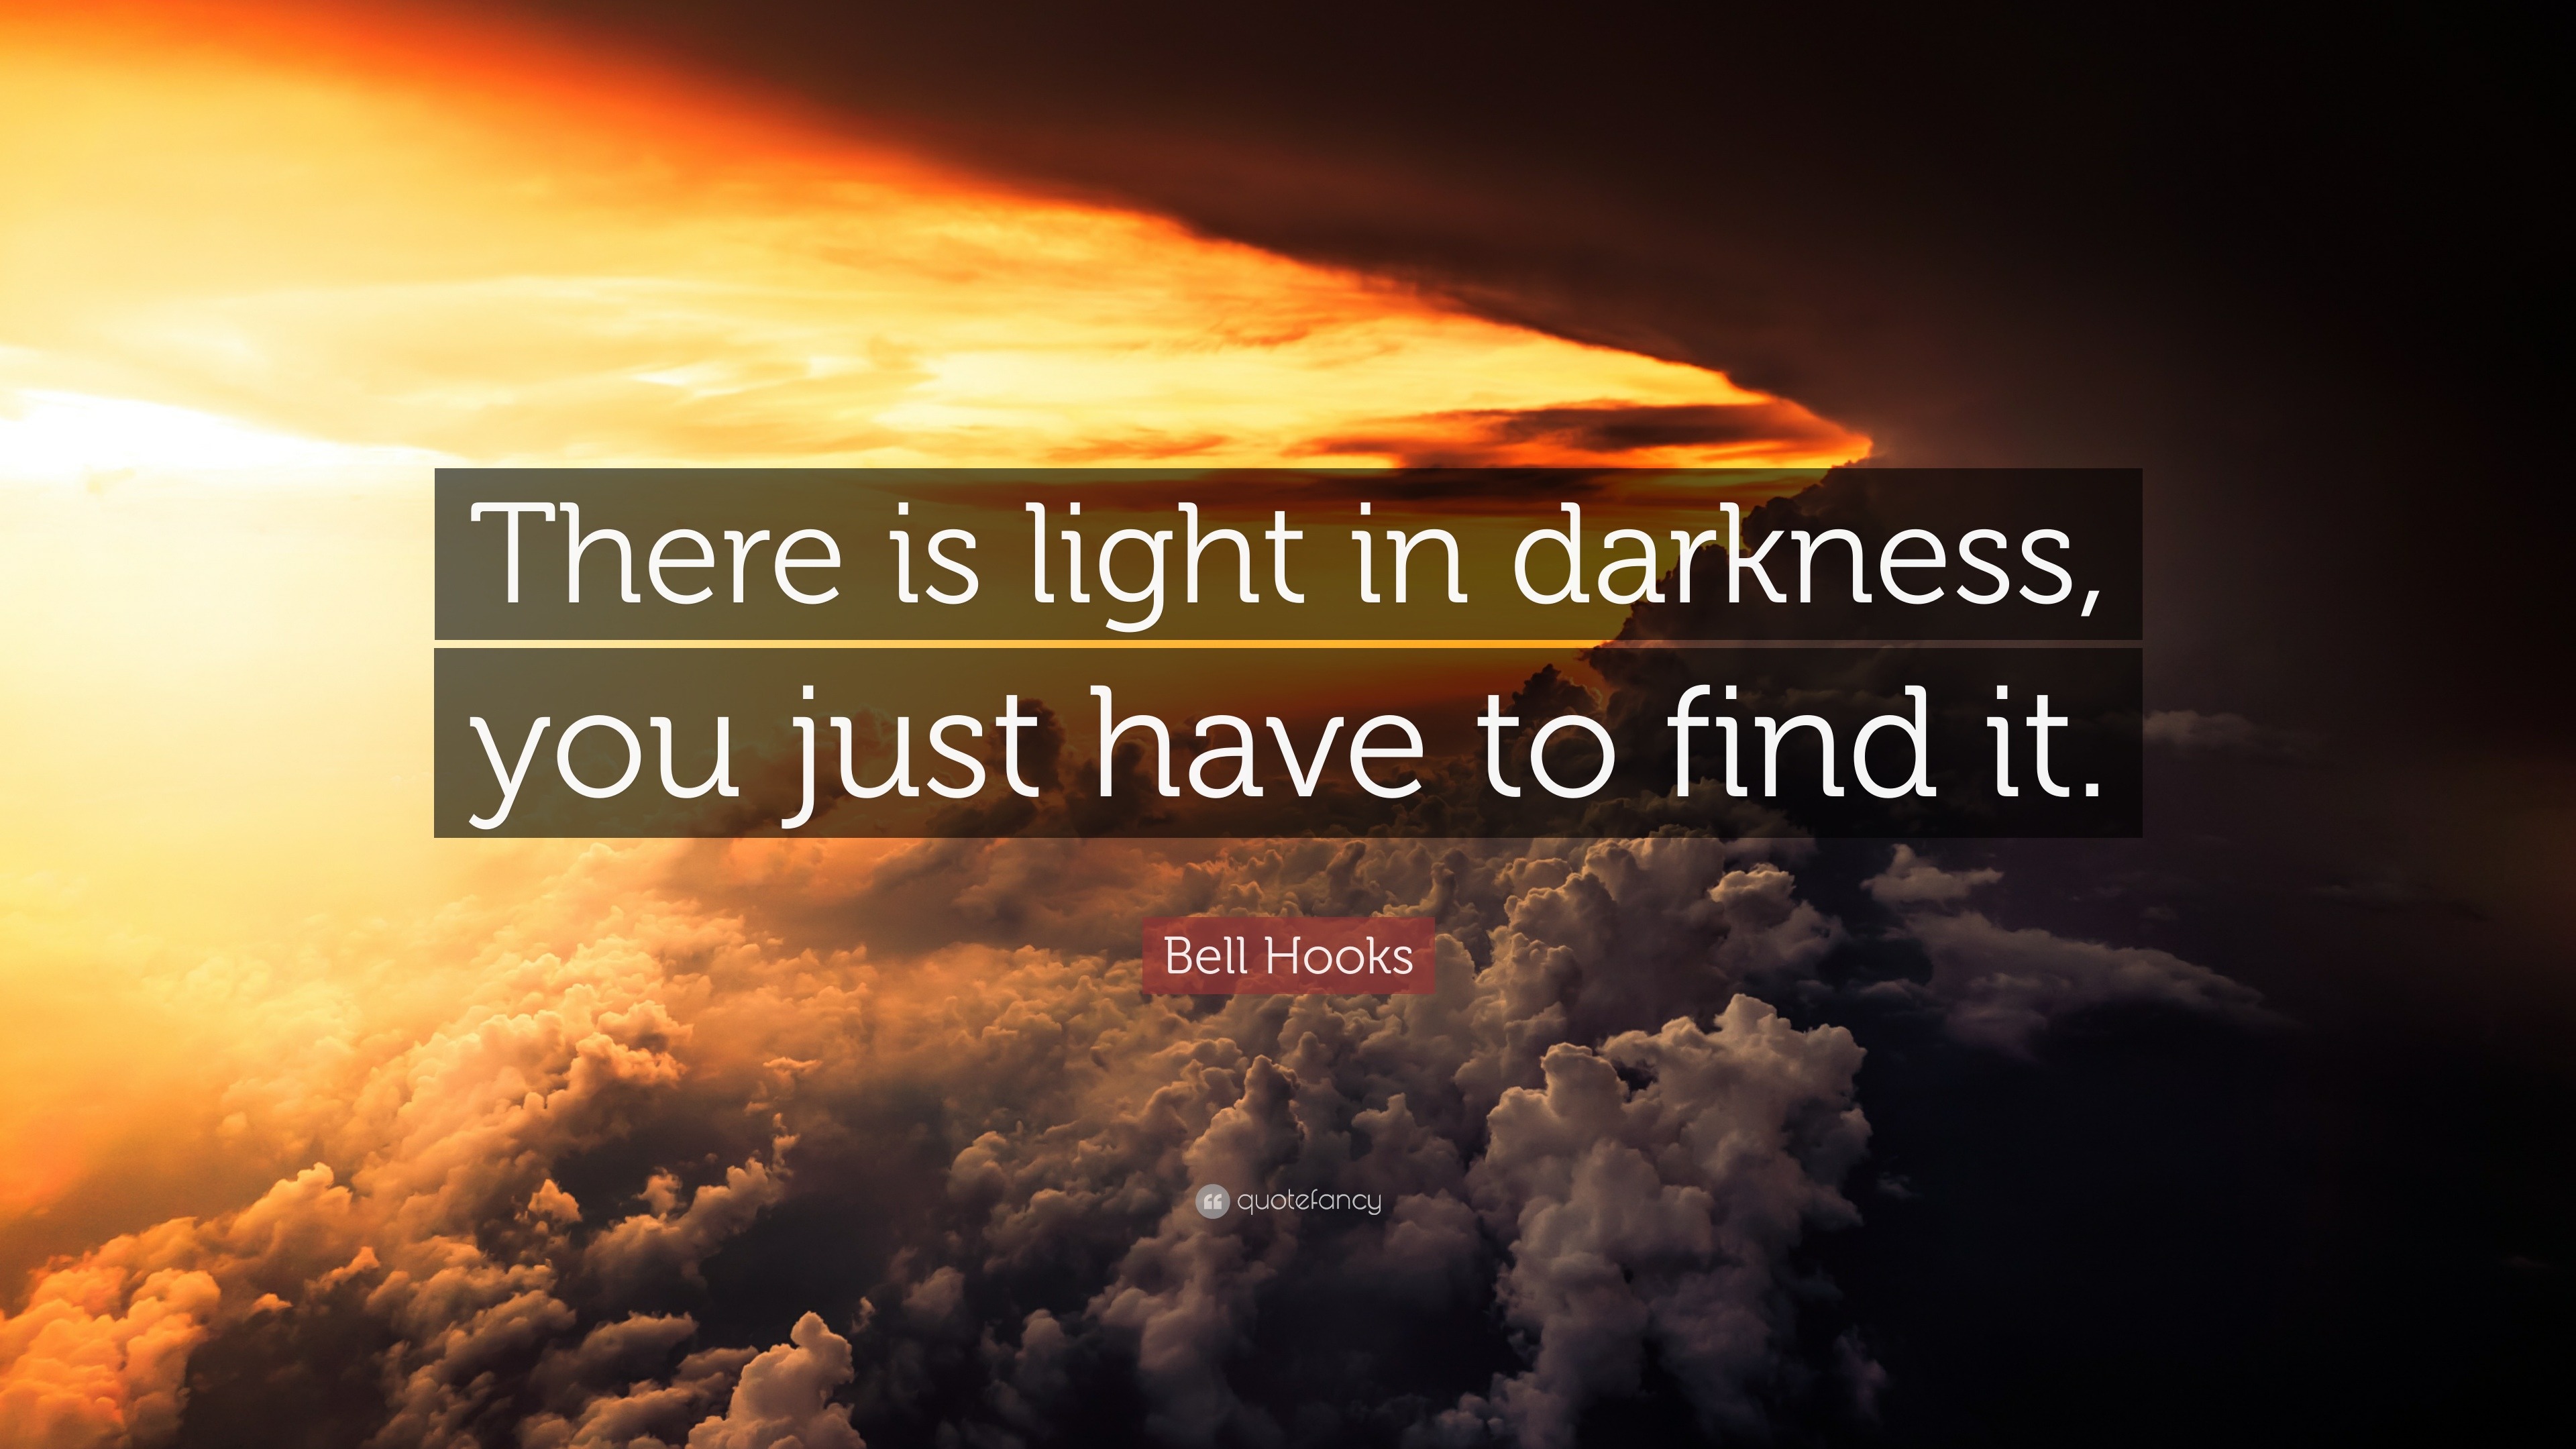 you are the light of the darkness